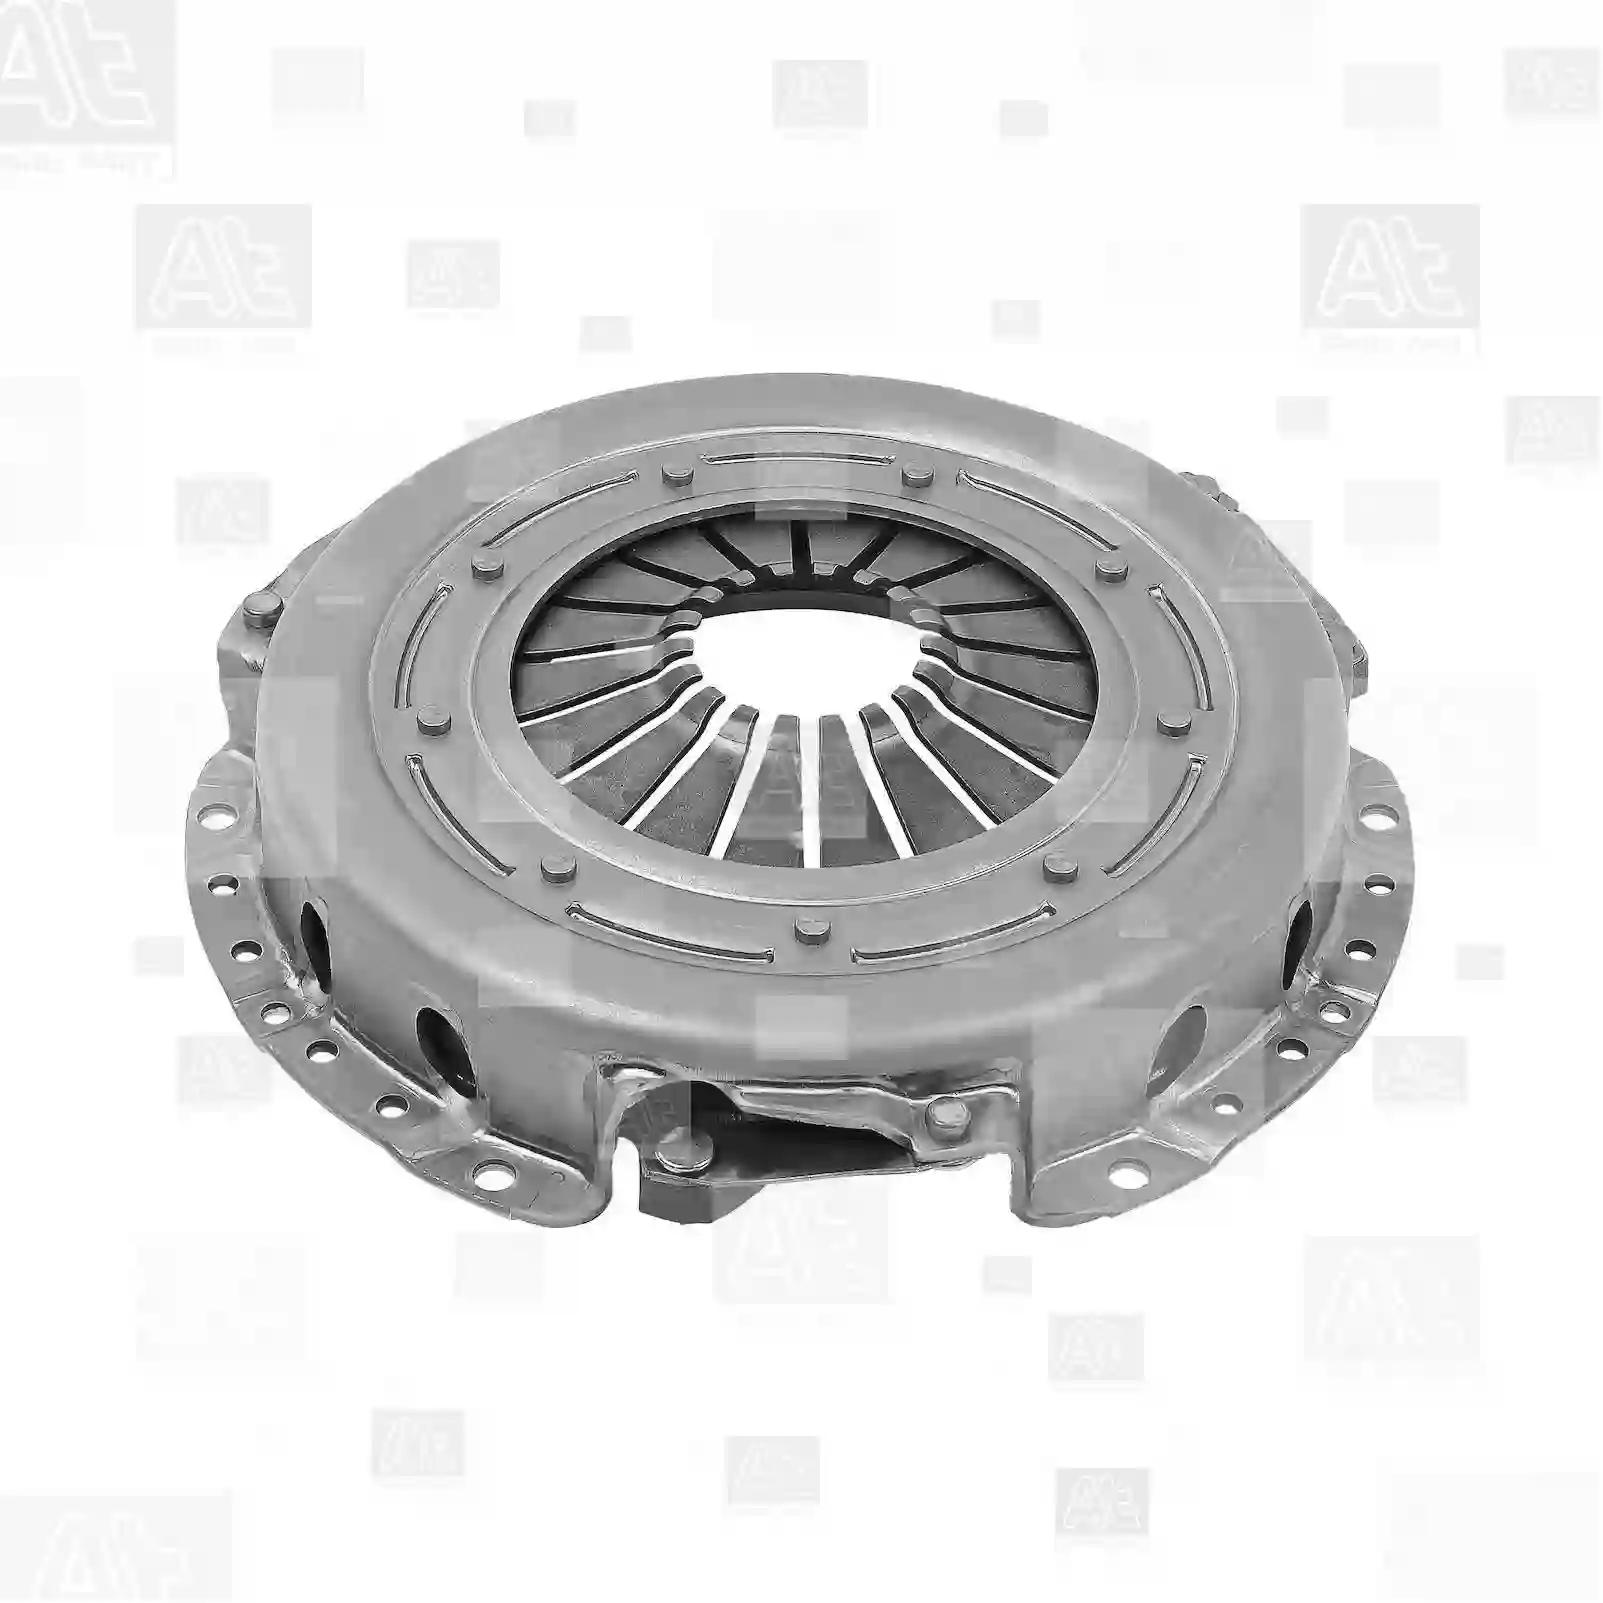 Clutch cover, at no 77722008, oem no: 7932568012, 9350146080, 04745051, 1475197, 1494880, 1518419, 1518960, 1555837, 1579980, 1602085, 1608612, 1645280, 1645297, 5001306, 5002960, 5002961, 5012192, 5019059, 5029570, 5029575, 5050634, 6099571, 6100324, 6104431, 6104432, 6106045, 6120888, 6151999, 6171011, 6177288, 6188558, 6973999, 88GB-7563-AA, 89GB-7563-AA, 89GB-7563-AB, 7932568012, 9350146080, GCP228 At Spare Part | Engine, Accelerator Pedal, Camshaft, Connecting Rod, Crankcase, Crankshaft, Cylinder Head, Engine Suspension Mountings, Exhaust Manifold, Exhaust Gas Recirculation, Filter Kits, Flywheel Housing, General Overhaul Kits, Engine, Intake Manifold, Oil Cleaner, Oil Cooler, Oil Filter, Oil Pump, Oil Sump, Piston & Liner, Sensor & Switch, Timing Case, Turbocharger, Cooling System, Belt Tensioner, Coolant Filter, Coolant Pipe, Corrosion Prevention Agent, Drive, Expansion Tank, Fan, Intercooler, Monitors & Gauges, Radiator, Thermostat, V-Belt / Timing belt, Water Pump, Fuel System, Electronical Injector Unit, Feed Pump, Fuel Filter, cpl., Fuel Gauge Sender,  Fuel Line, Fuel Pump, Fuel Tank, Injection Line Kit, Injection Pump, Exhaust System, Clutch & Pedal, Gearbox, Propeller Shaft, Axles, Brake System, Hubs & Wheels, Suspension, Leaf Spring, Universal Parts / Accessories, Steering, Electrical System, Cabin Clutch cover, at no 77722008, oem no: 7932568012, 9350146080, 04745051, 1475197, 1494880, 1518419, 1518960, 1555837, 1579980, 1602085, 1608612, 1645280, 1645297, 5001306, 5002960, 5002961, 5012192, 5019059, 5029570, 5029575, 5050634, 6099571, 6100324, 6104431, 6104432, 6106045, 6120888, 6151999, 6171011, 6177288, 6188558, 6973999, 88GB-7563-AA, 89GB-7563-AA, 89GB-7563-AB, 7932568012, 9350146080, GCP228 At Spare Part | Engine, Accelerator Pedal, Camshaft, Connecting Rod, Crankcase, Crankshaft, Cylinder Head, Engine Suspension Mountings, Exhaust Manifold, Exhaust Gas Recirculation, Filter Kits, Flywheel Housing, General Overhaul Kits, Engine, Intake Manifold, Oil Cleaner, Oil Cooler, Oil Filter, Oil Pump, Oil Sump, Piston & Liner, Sensor & Switch, Timing Case, Turbocharger, Cooling System, Belt Tensioner, Coolant Filter, Coolant Pipe, Corrosion Prevention Agent, Drive, Expansion Tank, Fan, Intercooler, Monitors & Gauges, Radiator, Thermostat, V-Belt / Timing belt, Water Pump, Fuel System, Electronical Injector Unit, Feed Pump, Fuel Filter, cpl., Fuel Gauge Sender,  Fuel Line, Fuel Pump, Fuel Tank, Injection Line Kit, Injection Pump, Exhaust System, Clutch & Pedal, Gearbox, Propeller Shaft, Axles, Brake System, Hubs & Wheels, Suspension, Leaf Spring, Universal Parts / Accessories, Steering, Electrical System, Cabin